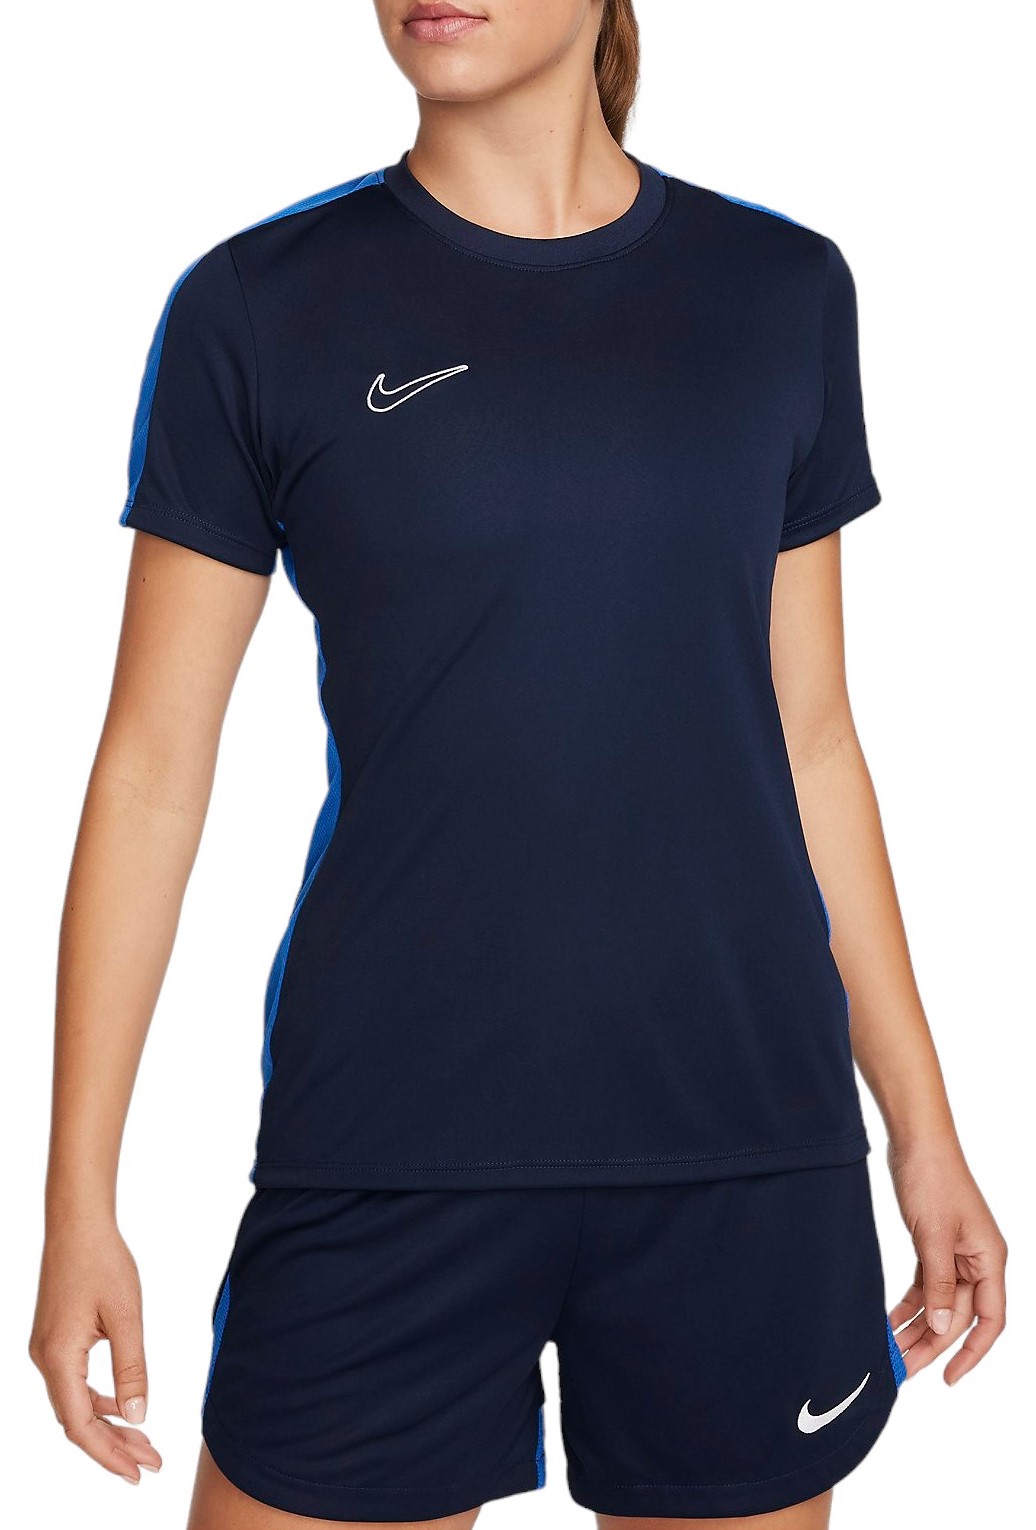 T-shirt Nike small W NK DF ACD23 TOP SS